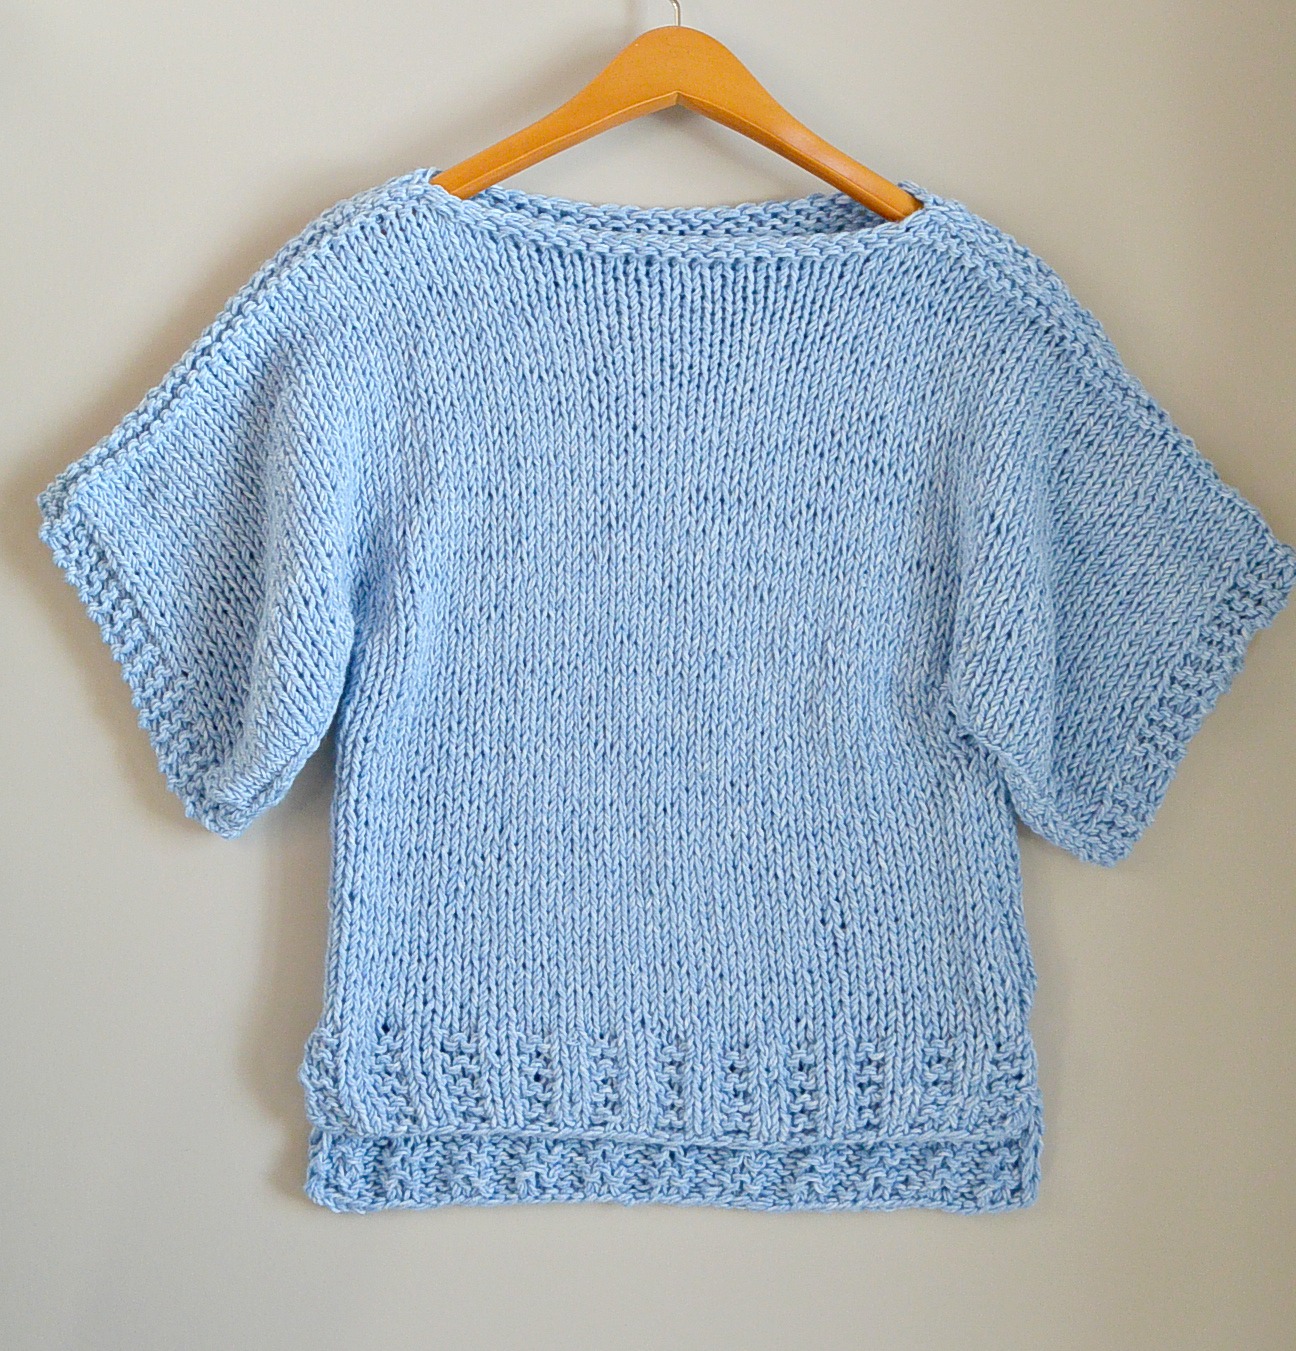 Knitted t shirt